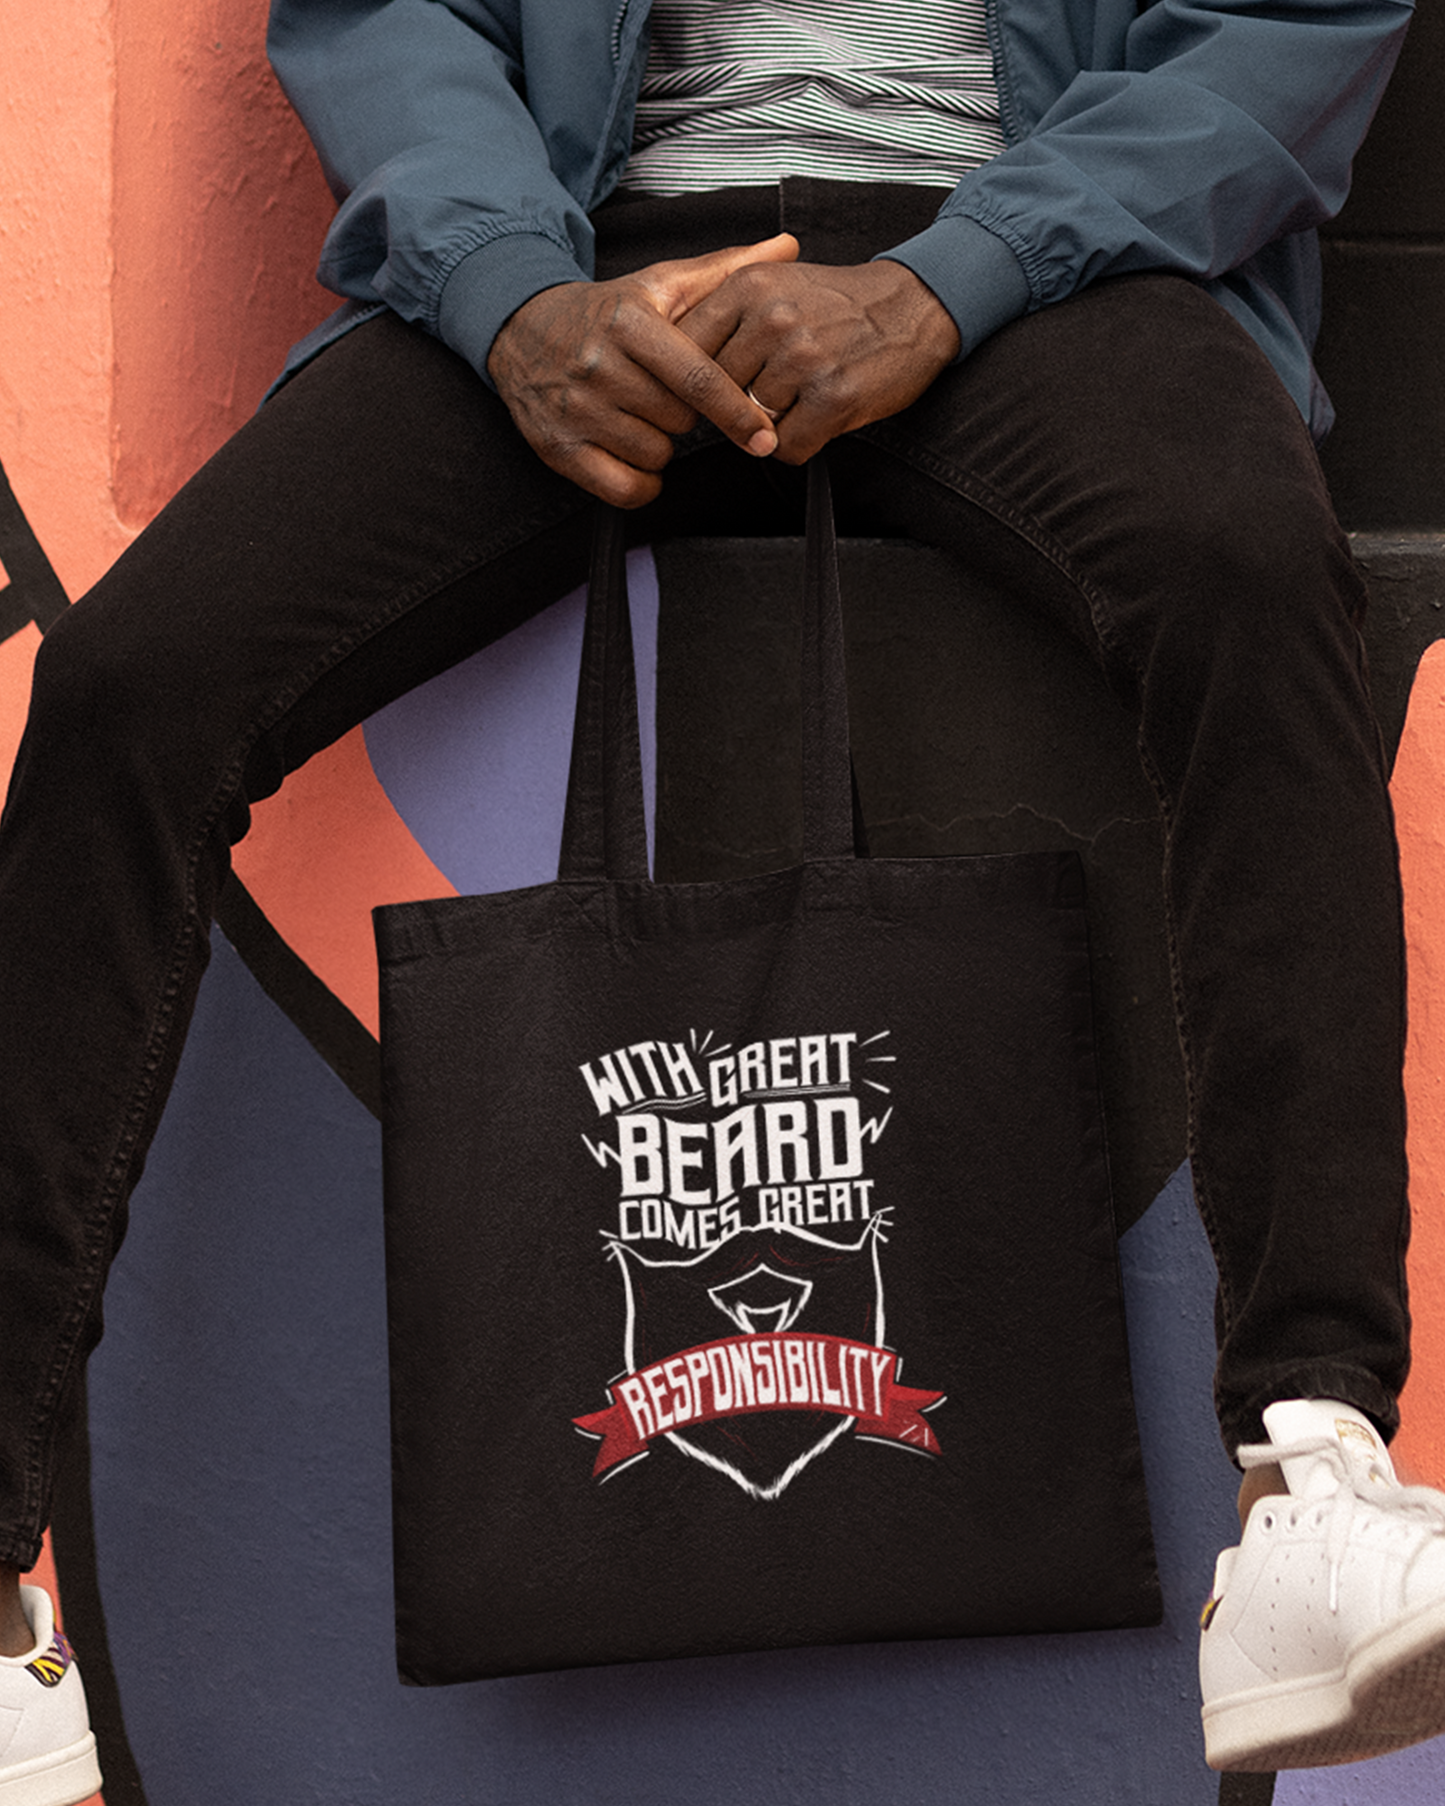 With Great Beard Comes Great Responsibility Tote Bag